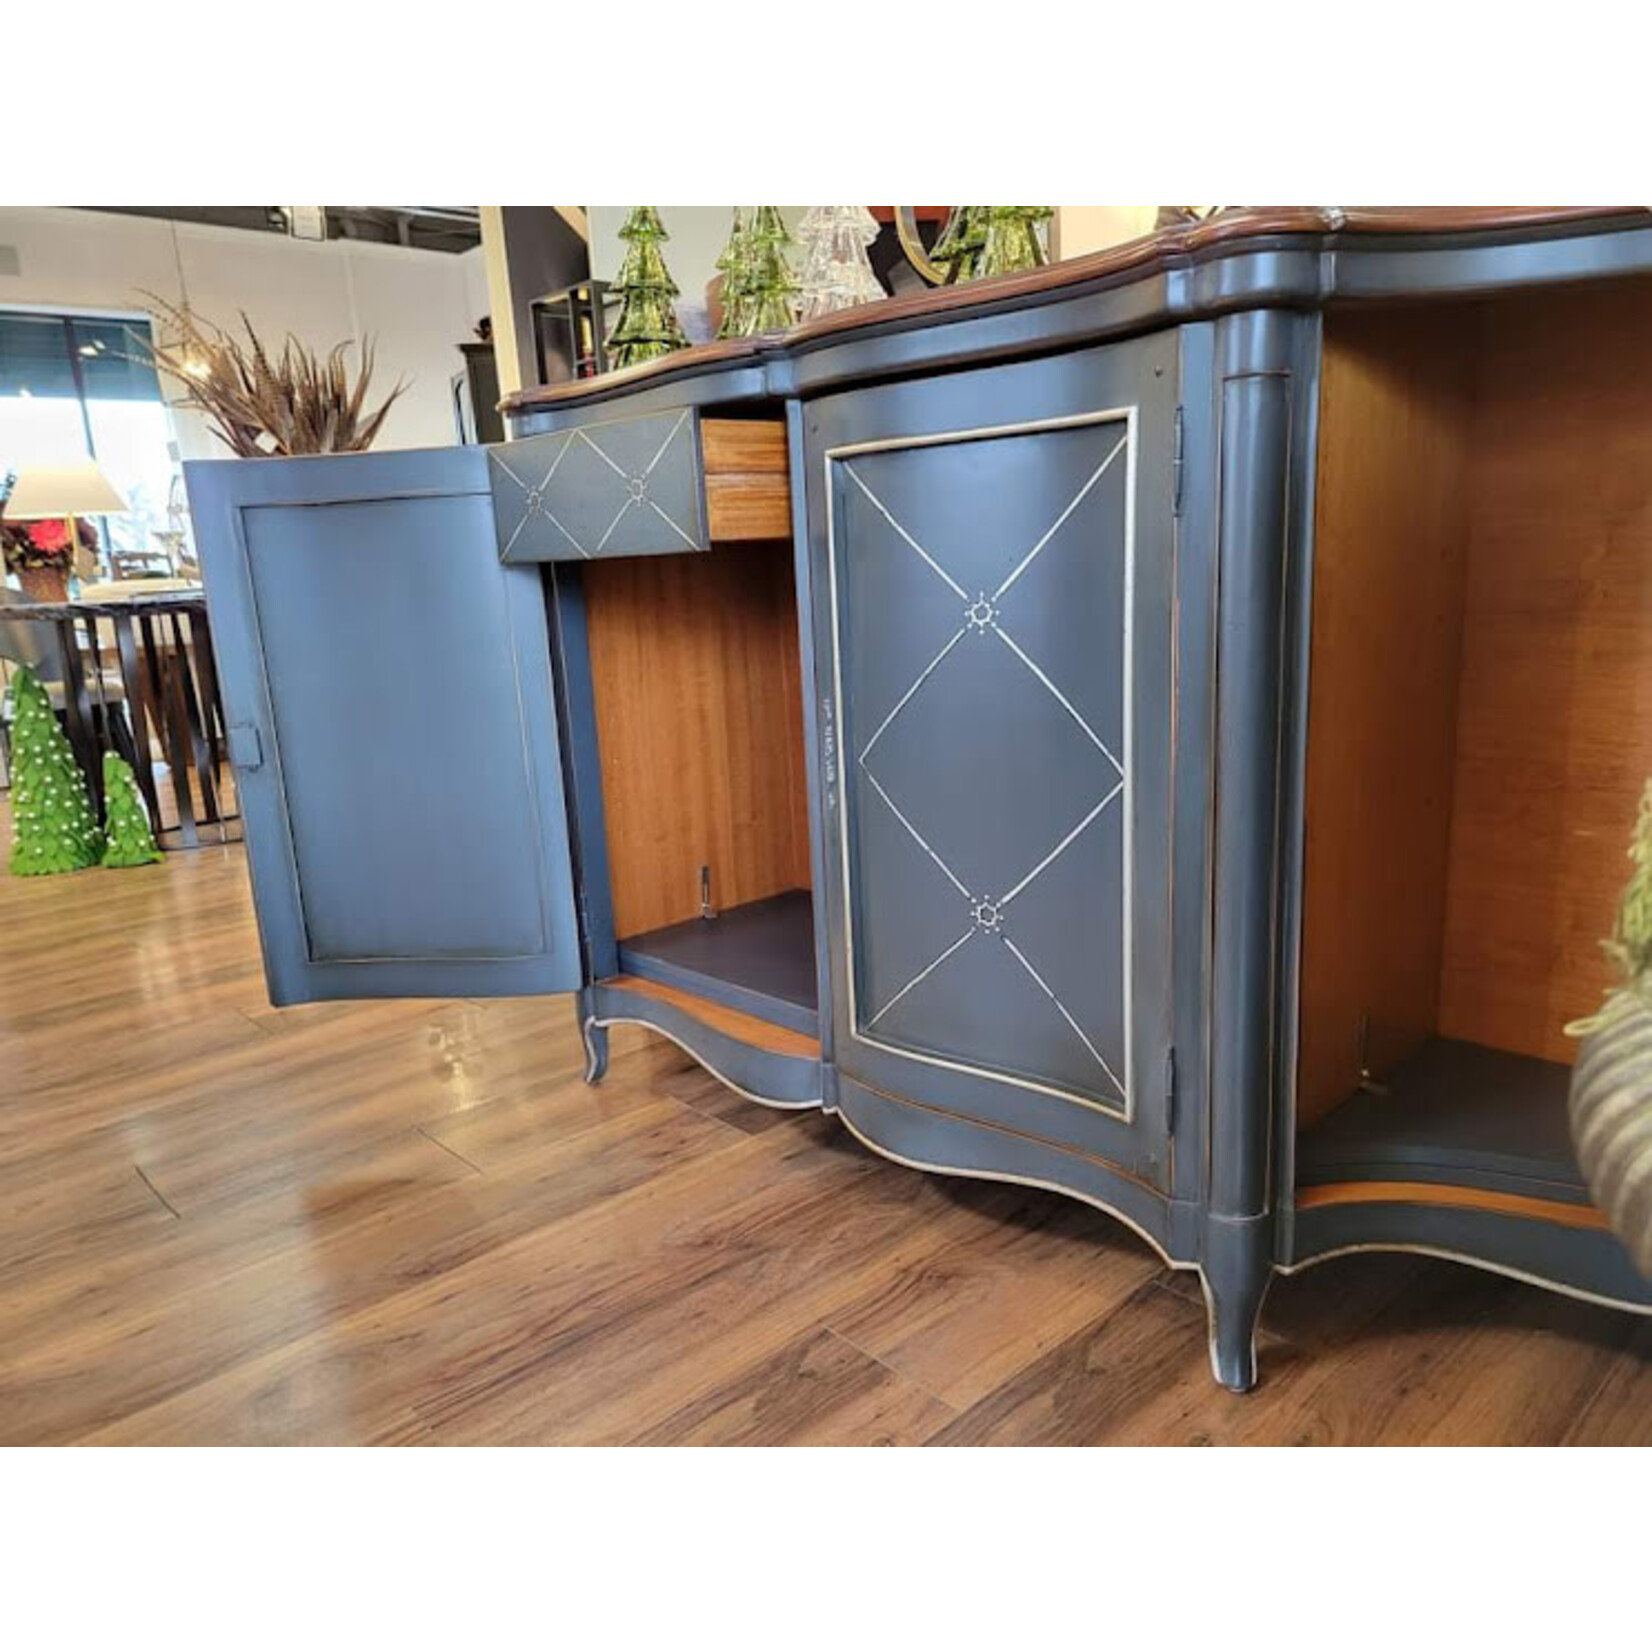 David Michael Painted Blue French Sideboard with Silver Accents & Walnut Top